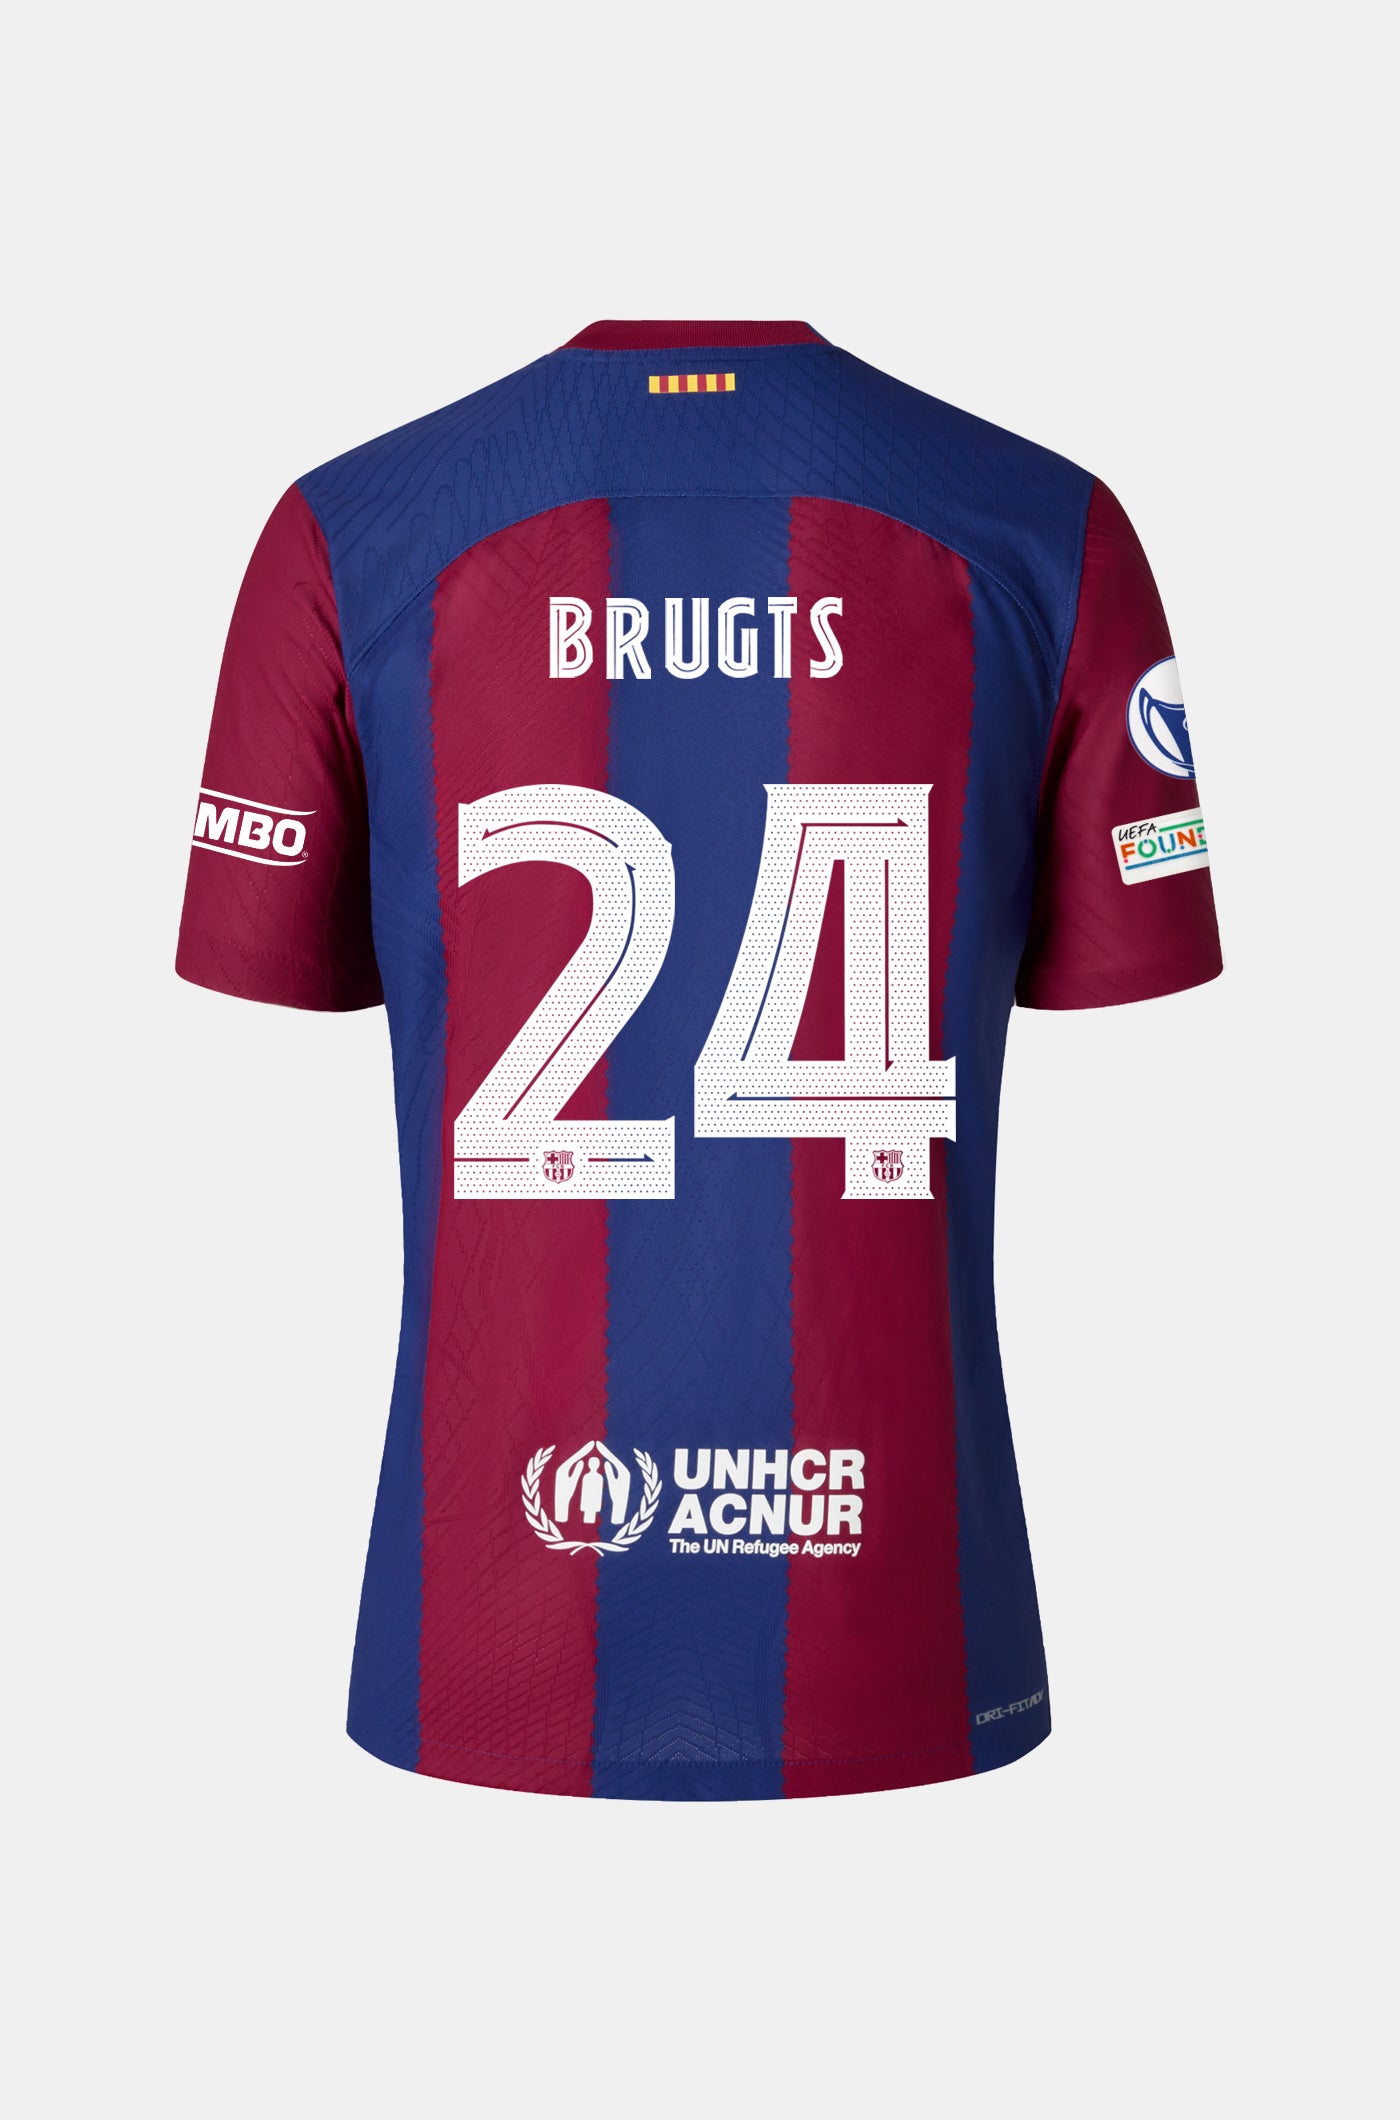 UWCL FC Barcelona home shirt 23/24 Player's Edition  - BRUGTS